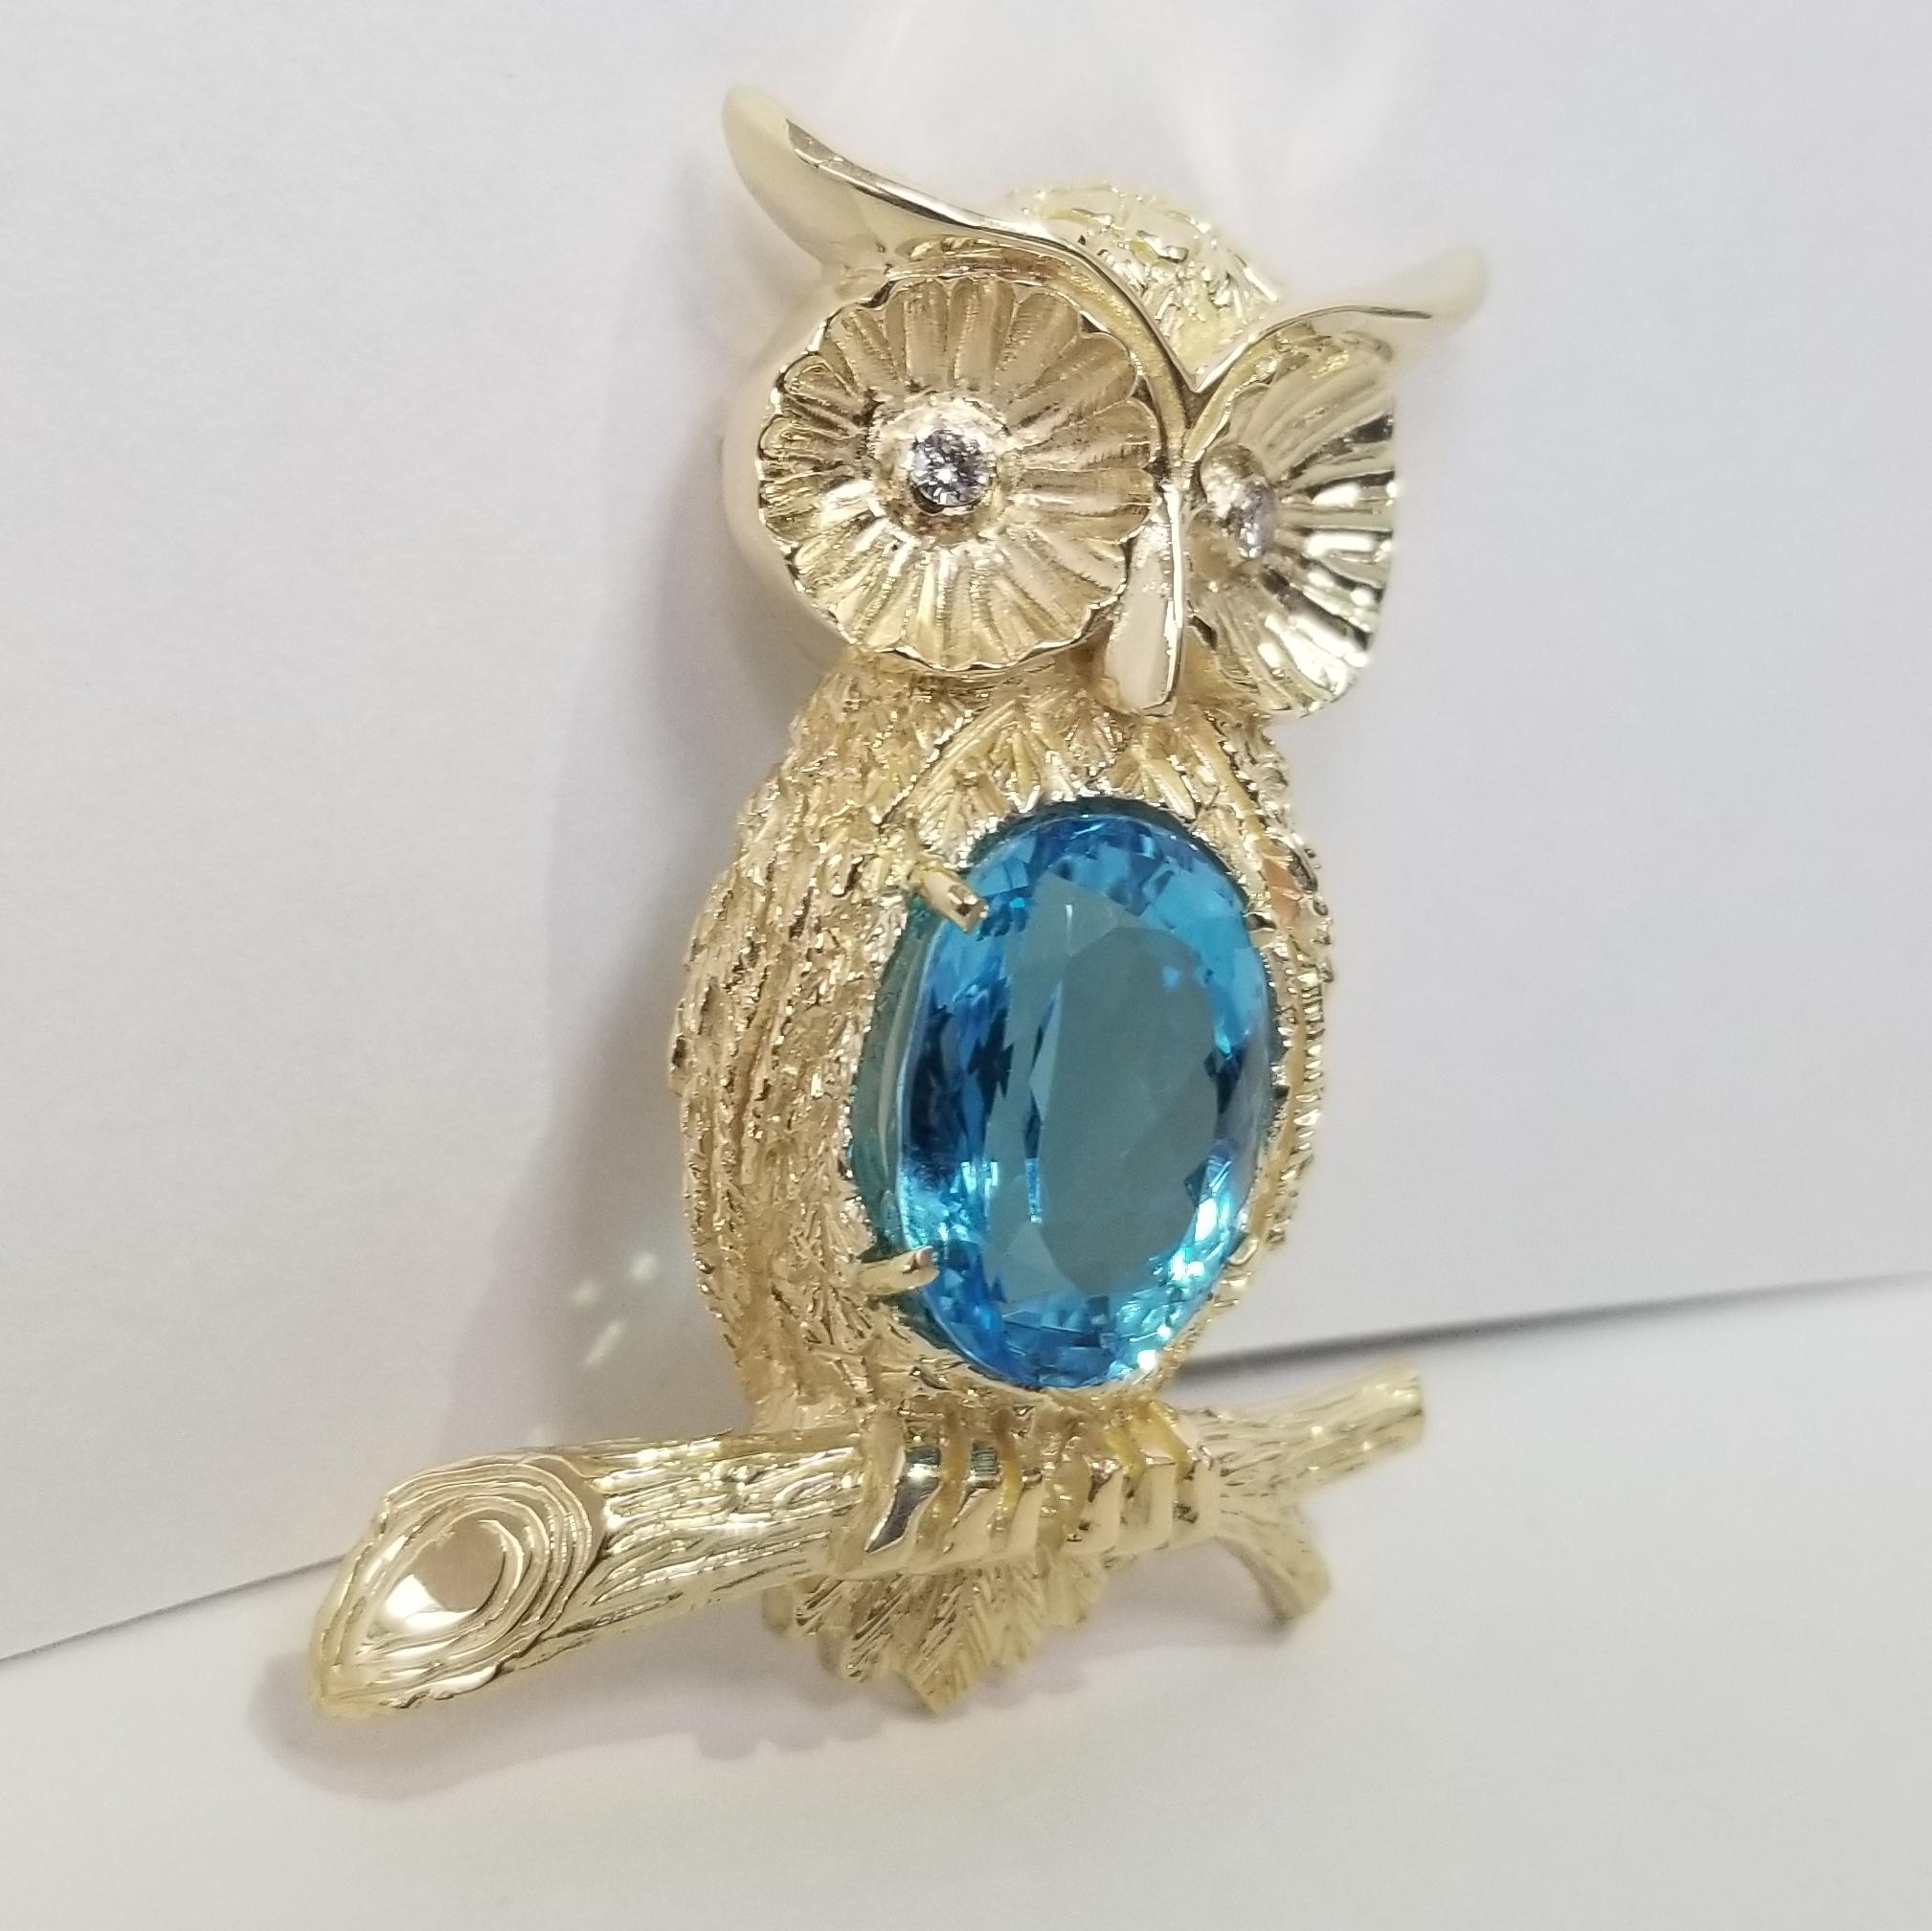 Specifications:
    main stone: Blue Topaz 15.78cts.
    additional: ROUND CUT DIAMONDS
    diamonds: 2 PCS
    carat total weight: APPROX 0.10CTW
    color: G
    clarity: VS
    brand: custom
    metal: 14K YELLOW gold
    type: PIN/BROOCH
   